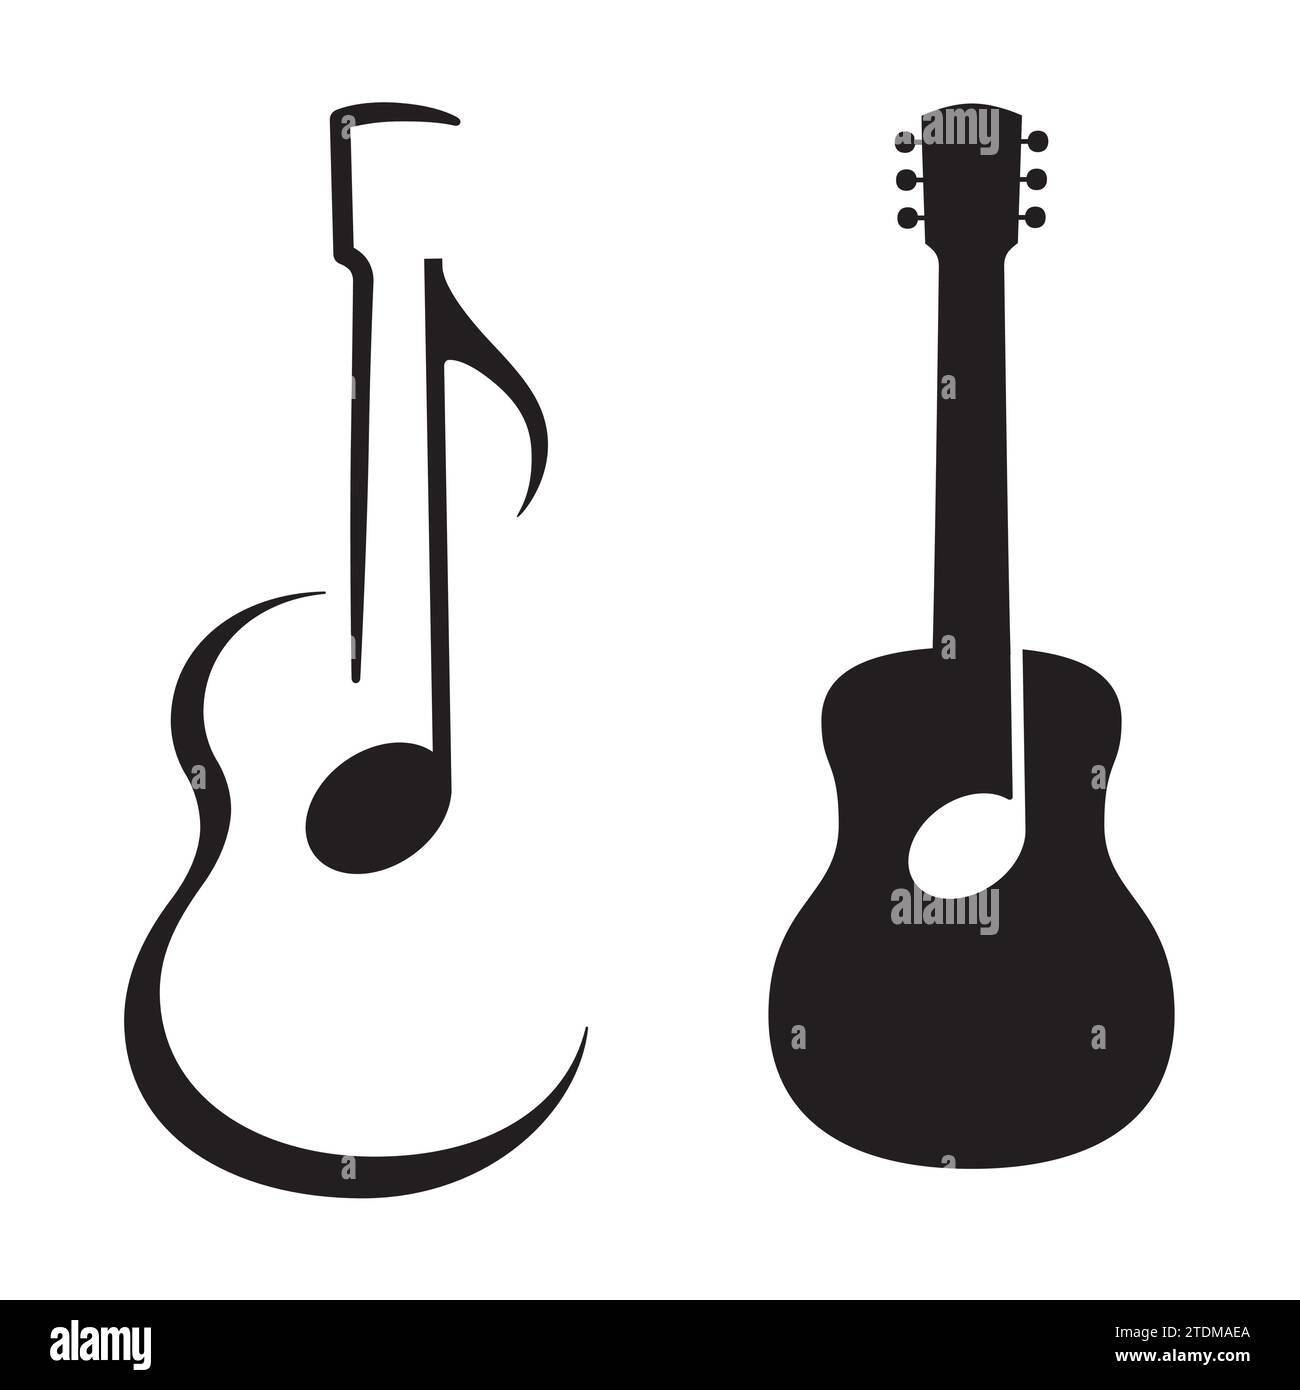 graphic guitar symbol with a note in the middle Stock Vector